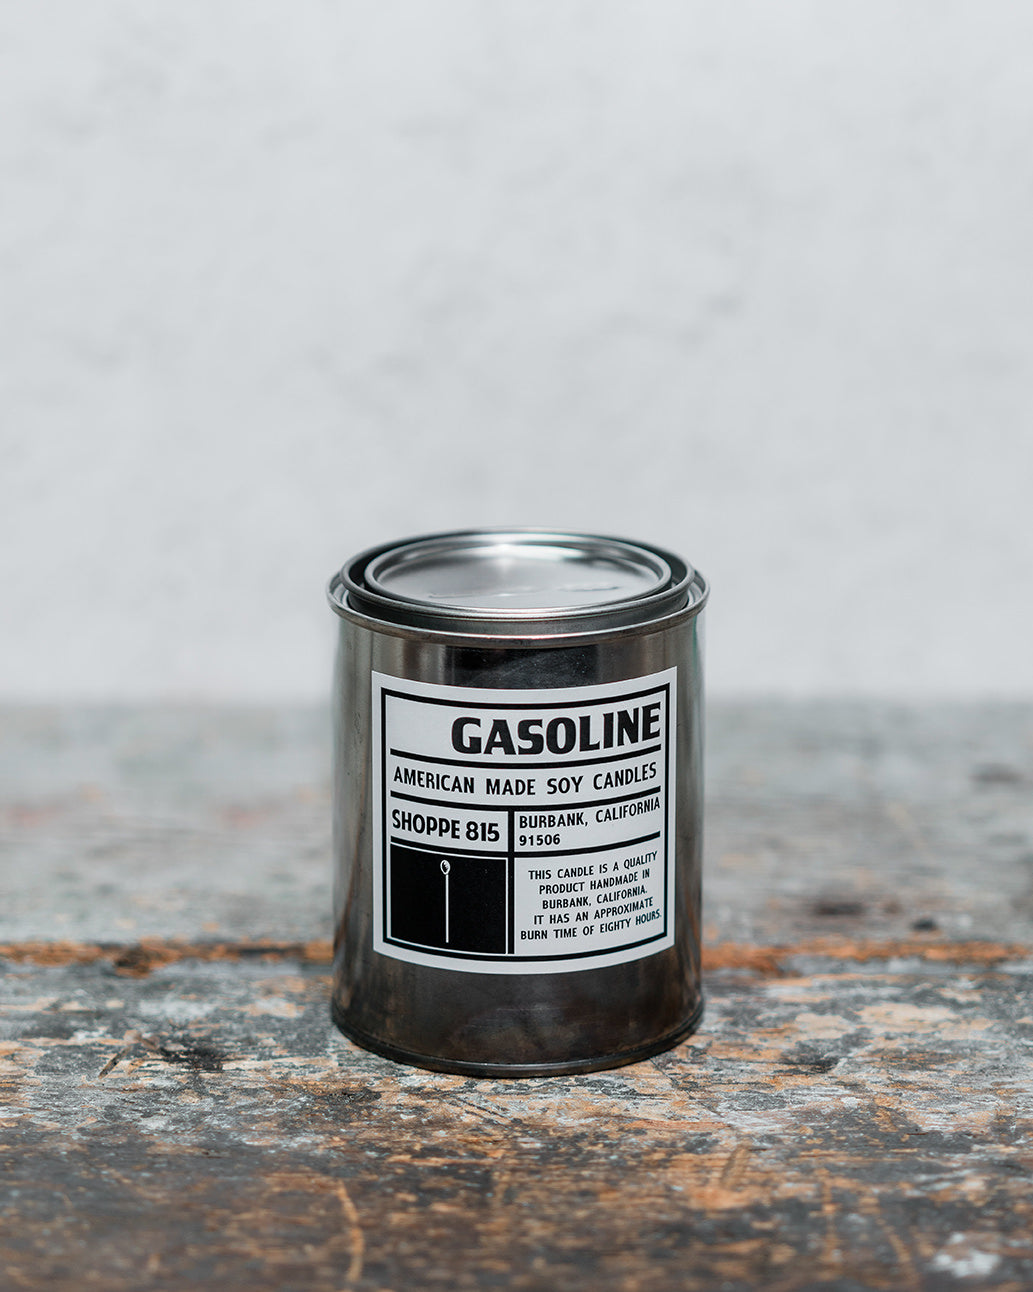 Gasoline gender neutral tin candle on wooden shelf with packaging